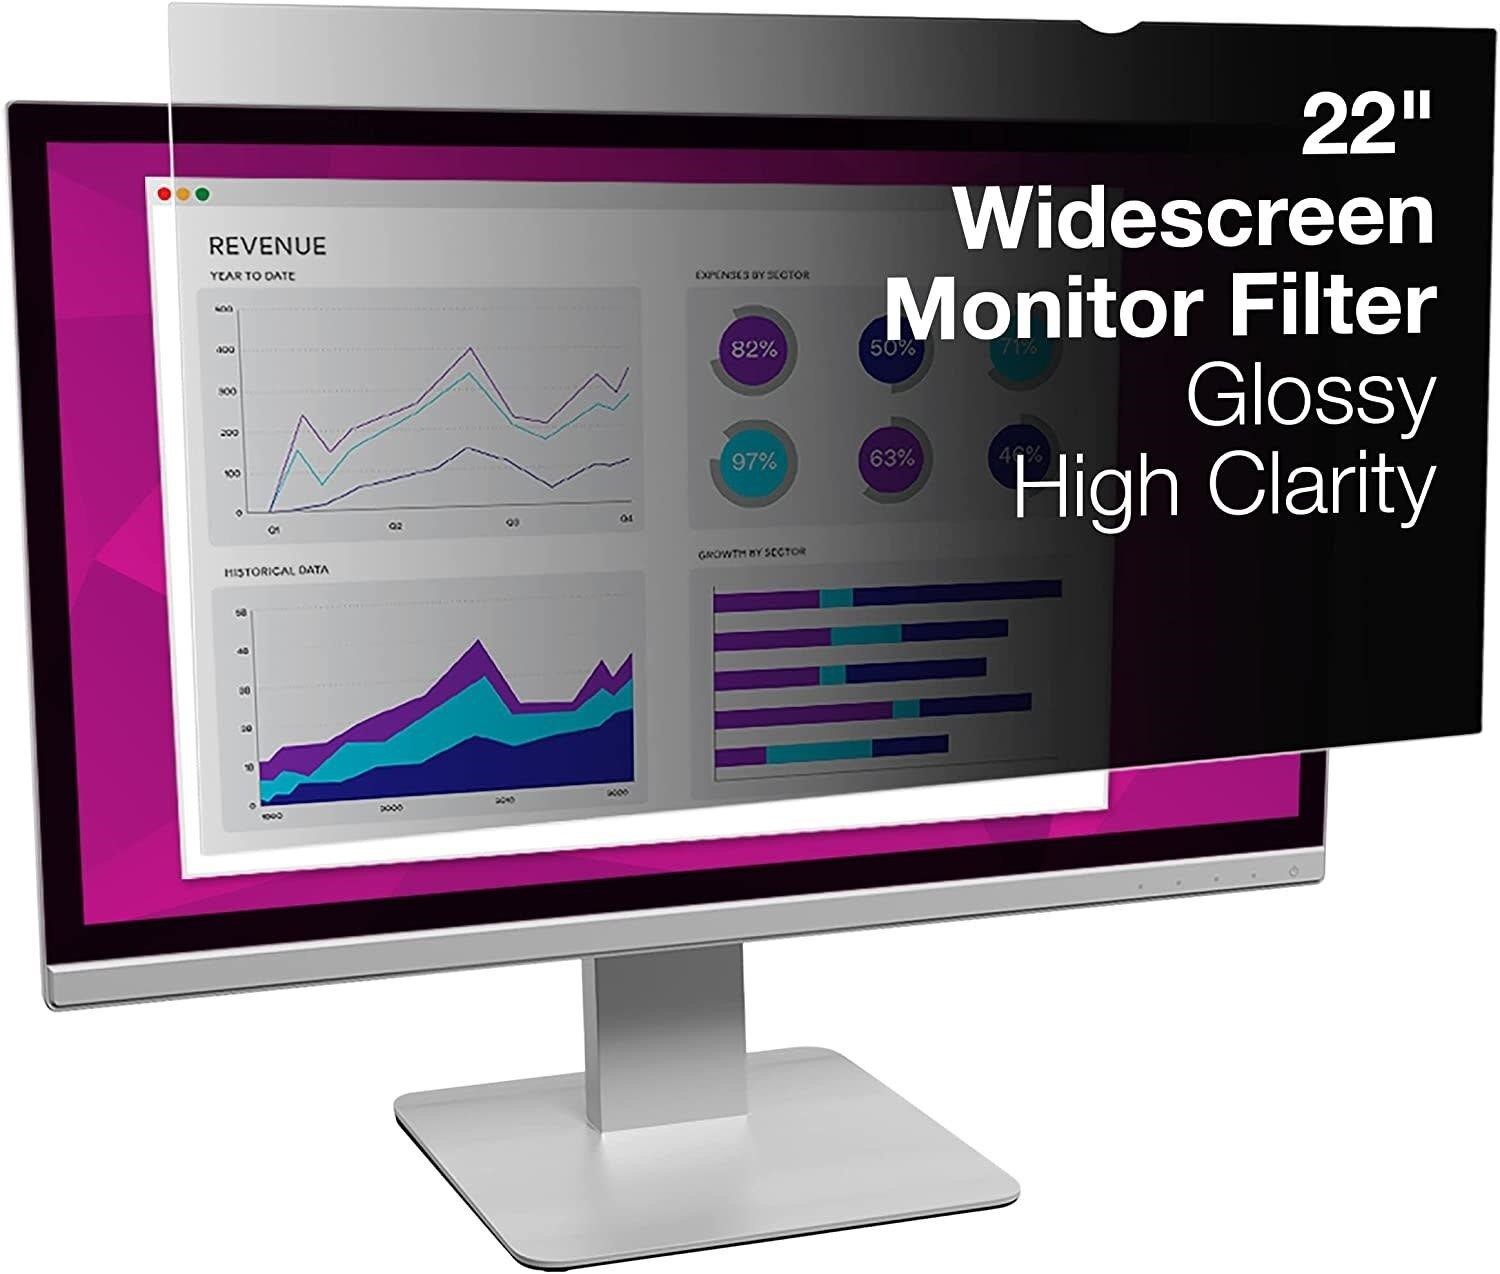 3M High Clarity Privacy Filter for 22" Monitor